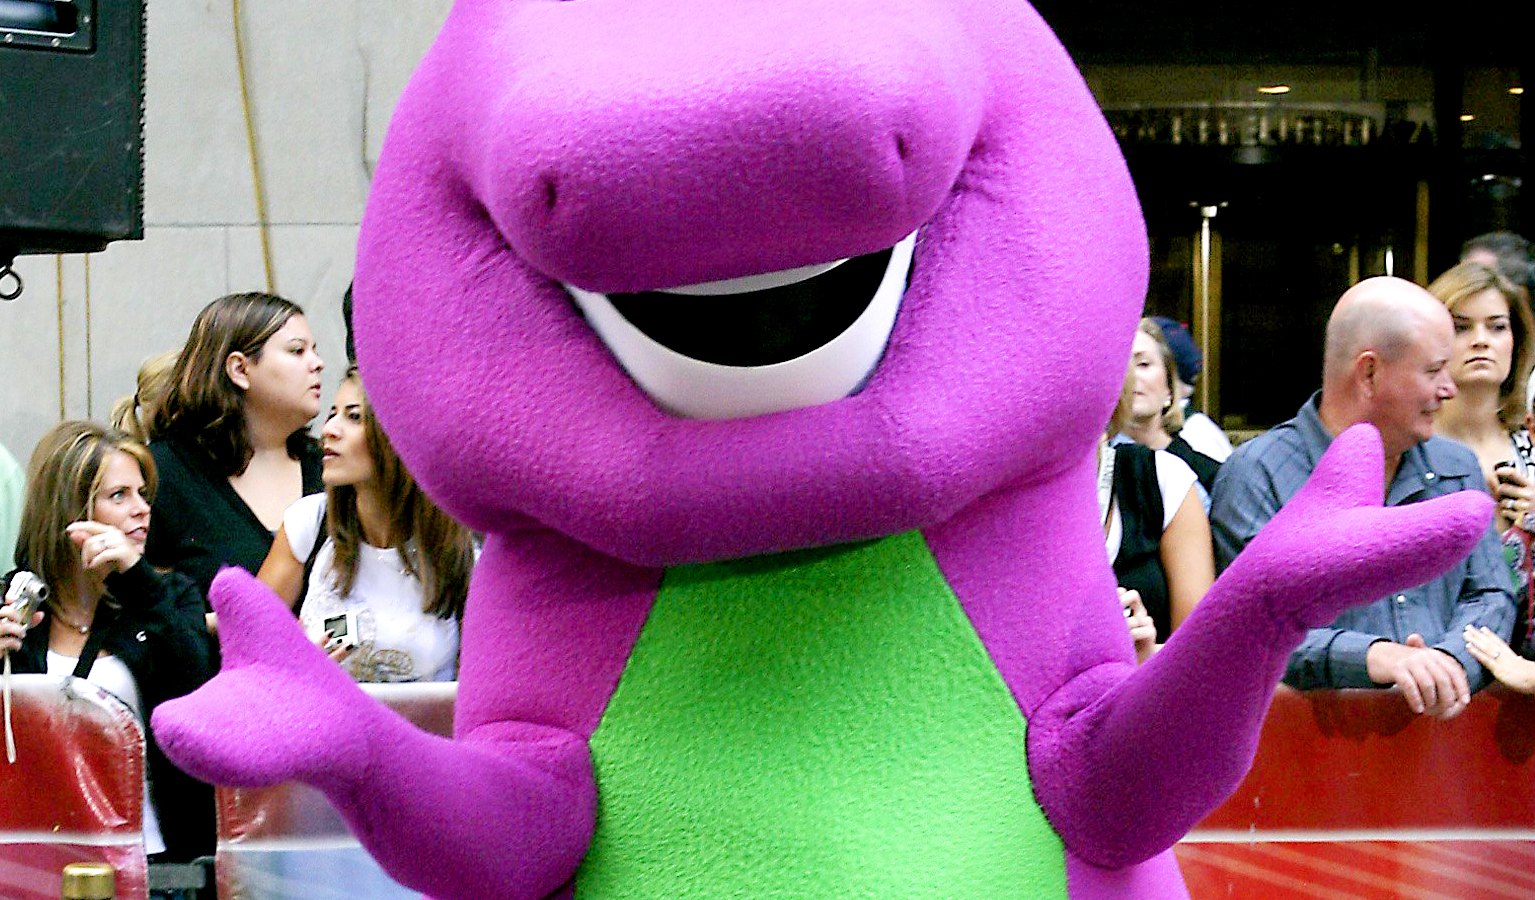 Barney Creator's Son Faces 15 Years in Prison for Shooting Neighbor